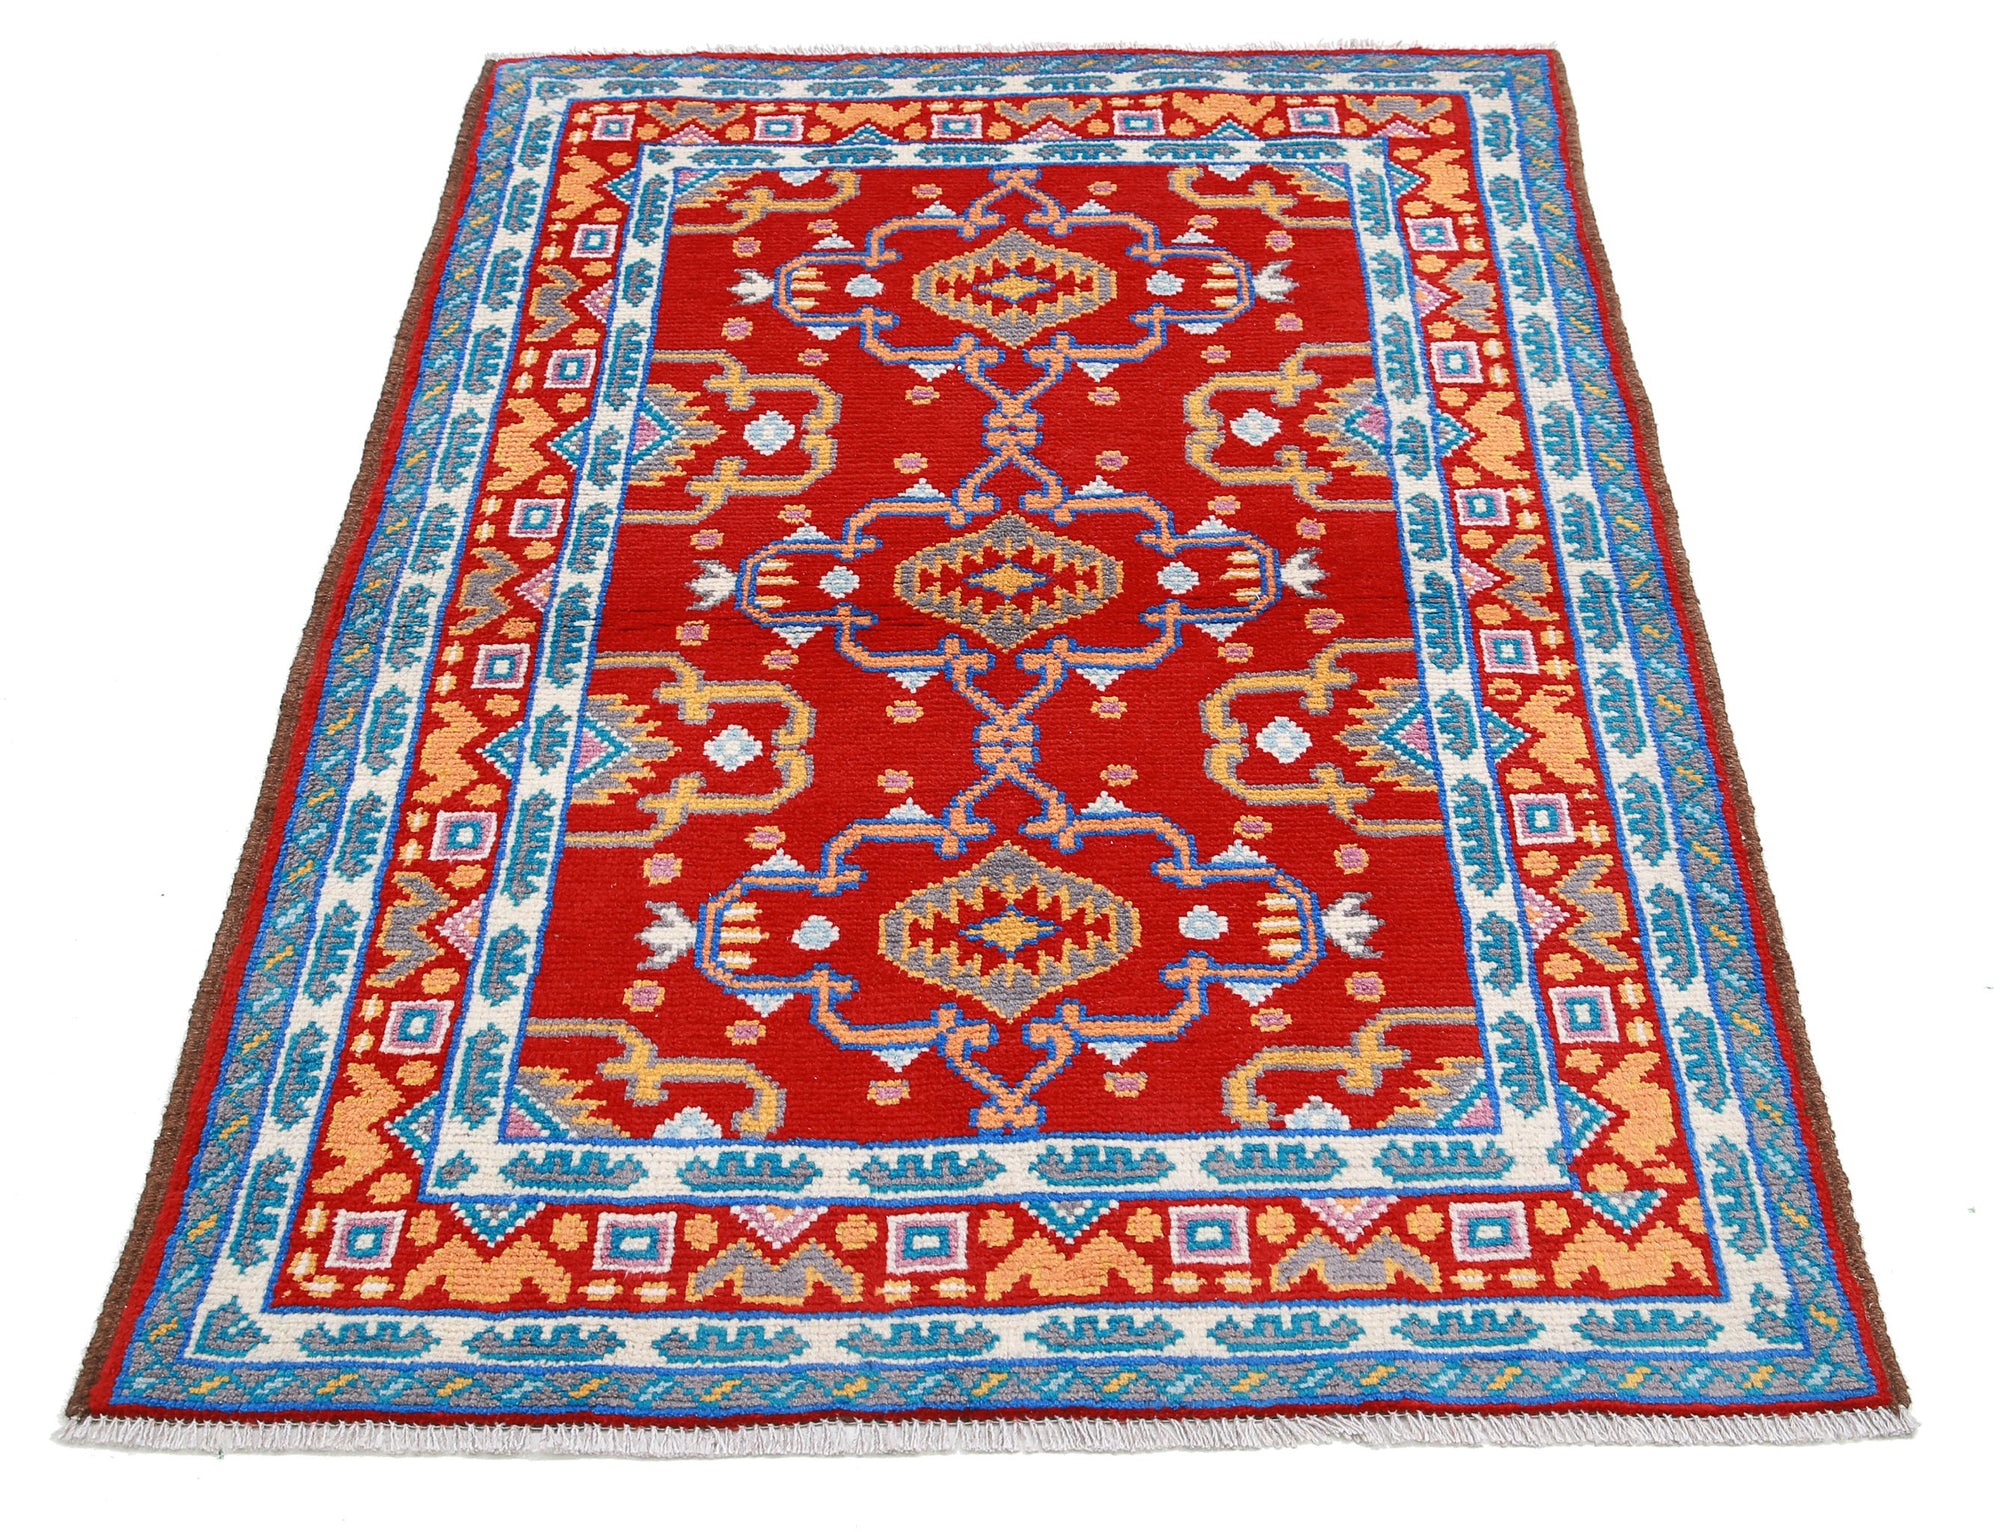 Revival-hand-knotted-qarghani-wool-rug-5014209-3.jpg